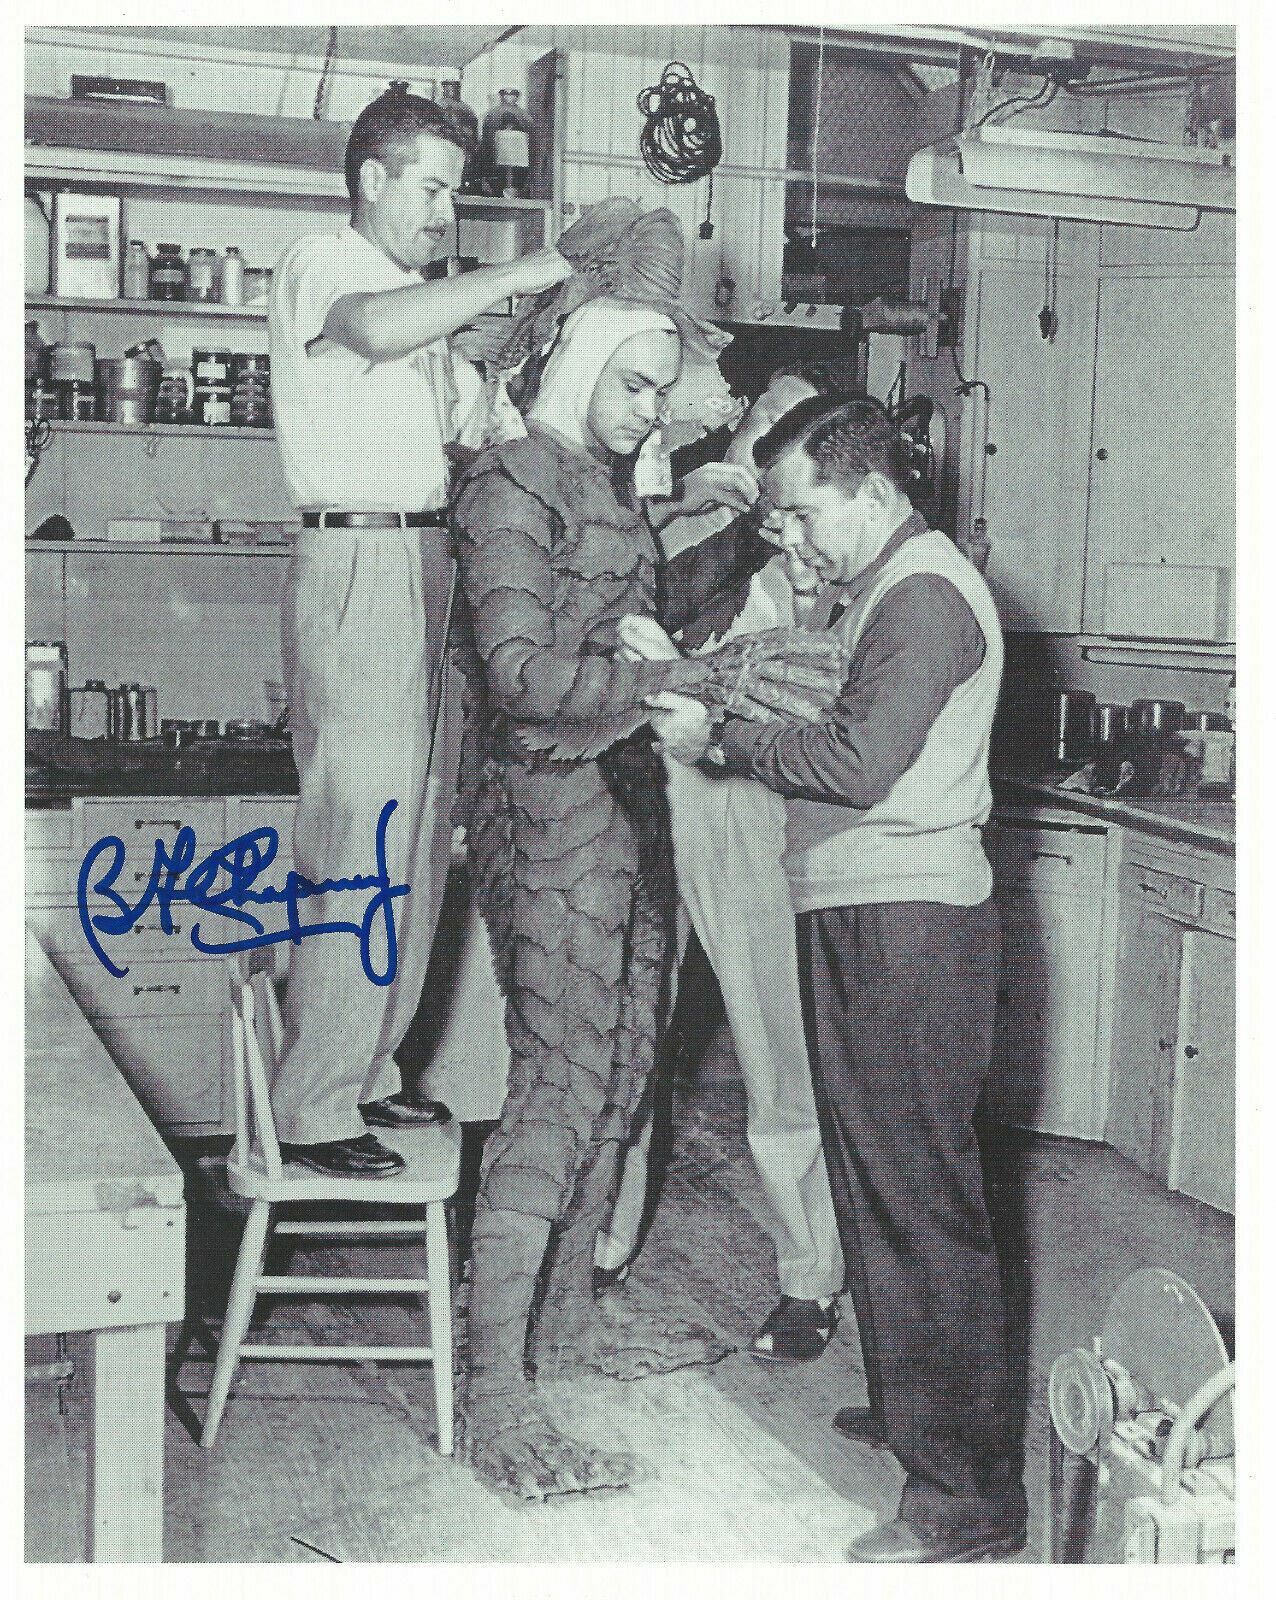 Ben Chapman: Creature from the Black Lagoon Autographed Signed 8x10 Photo Poster painting